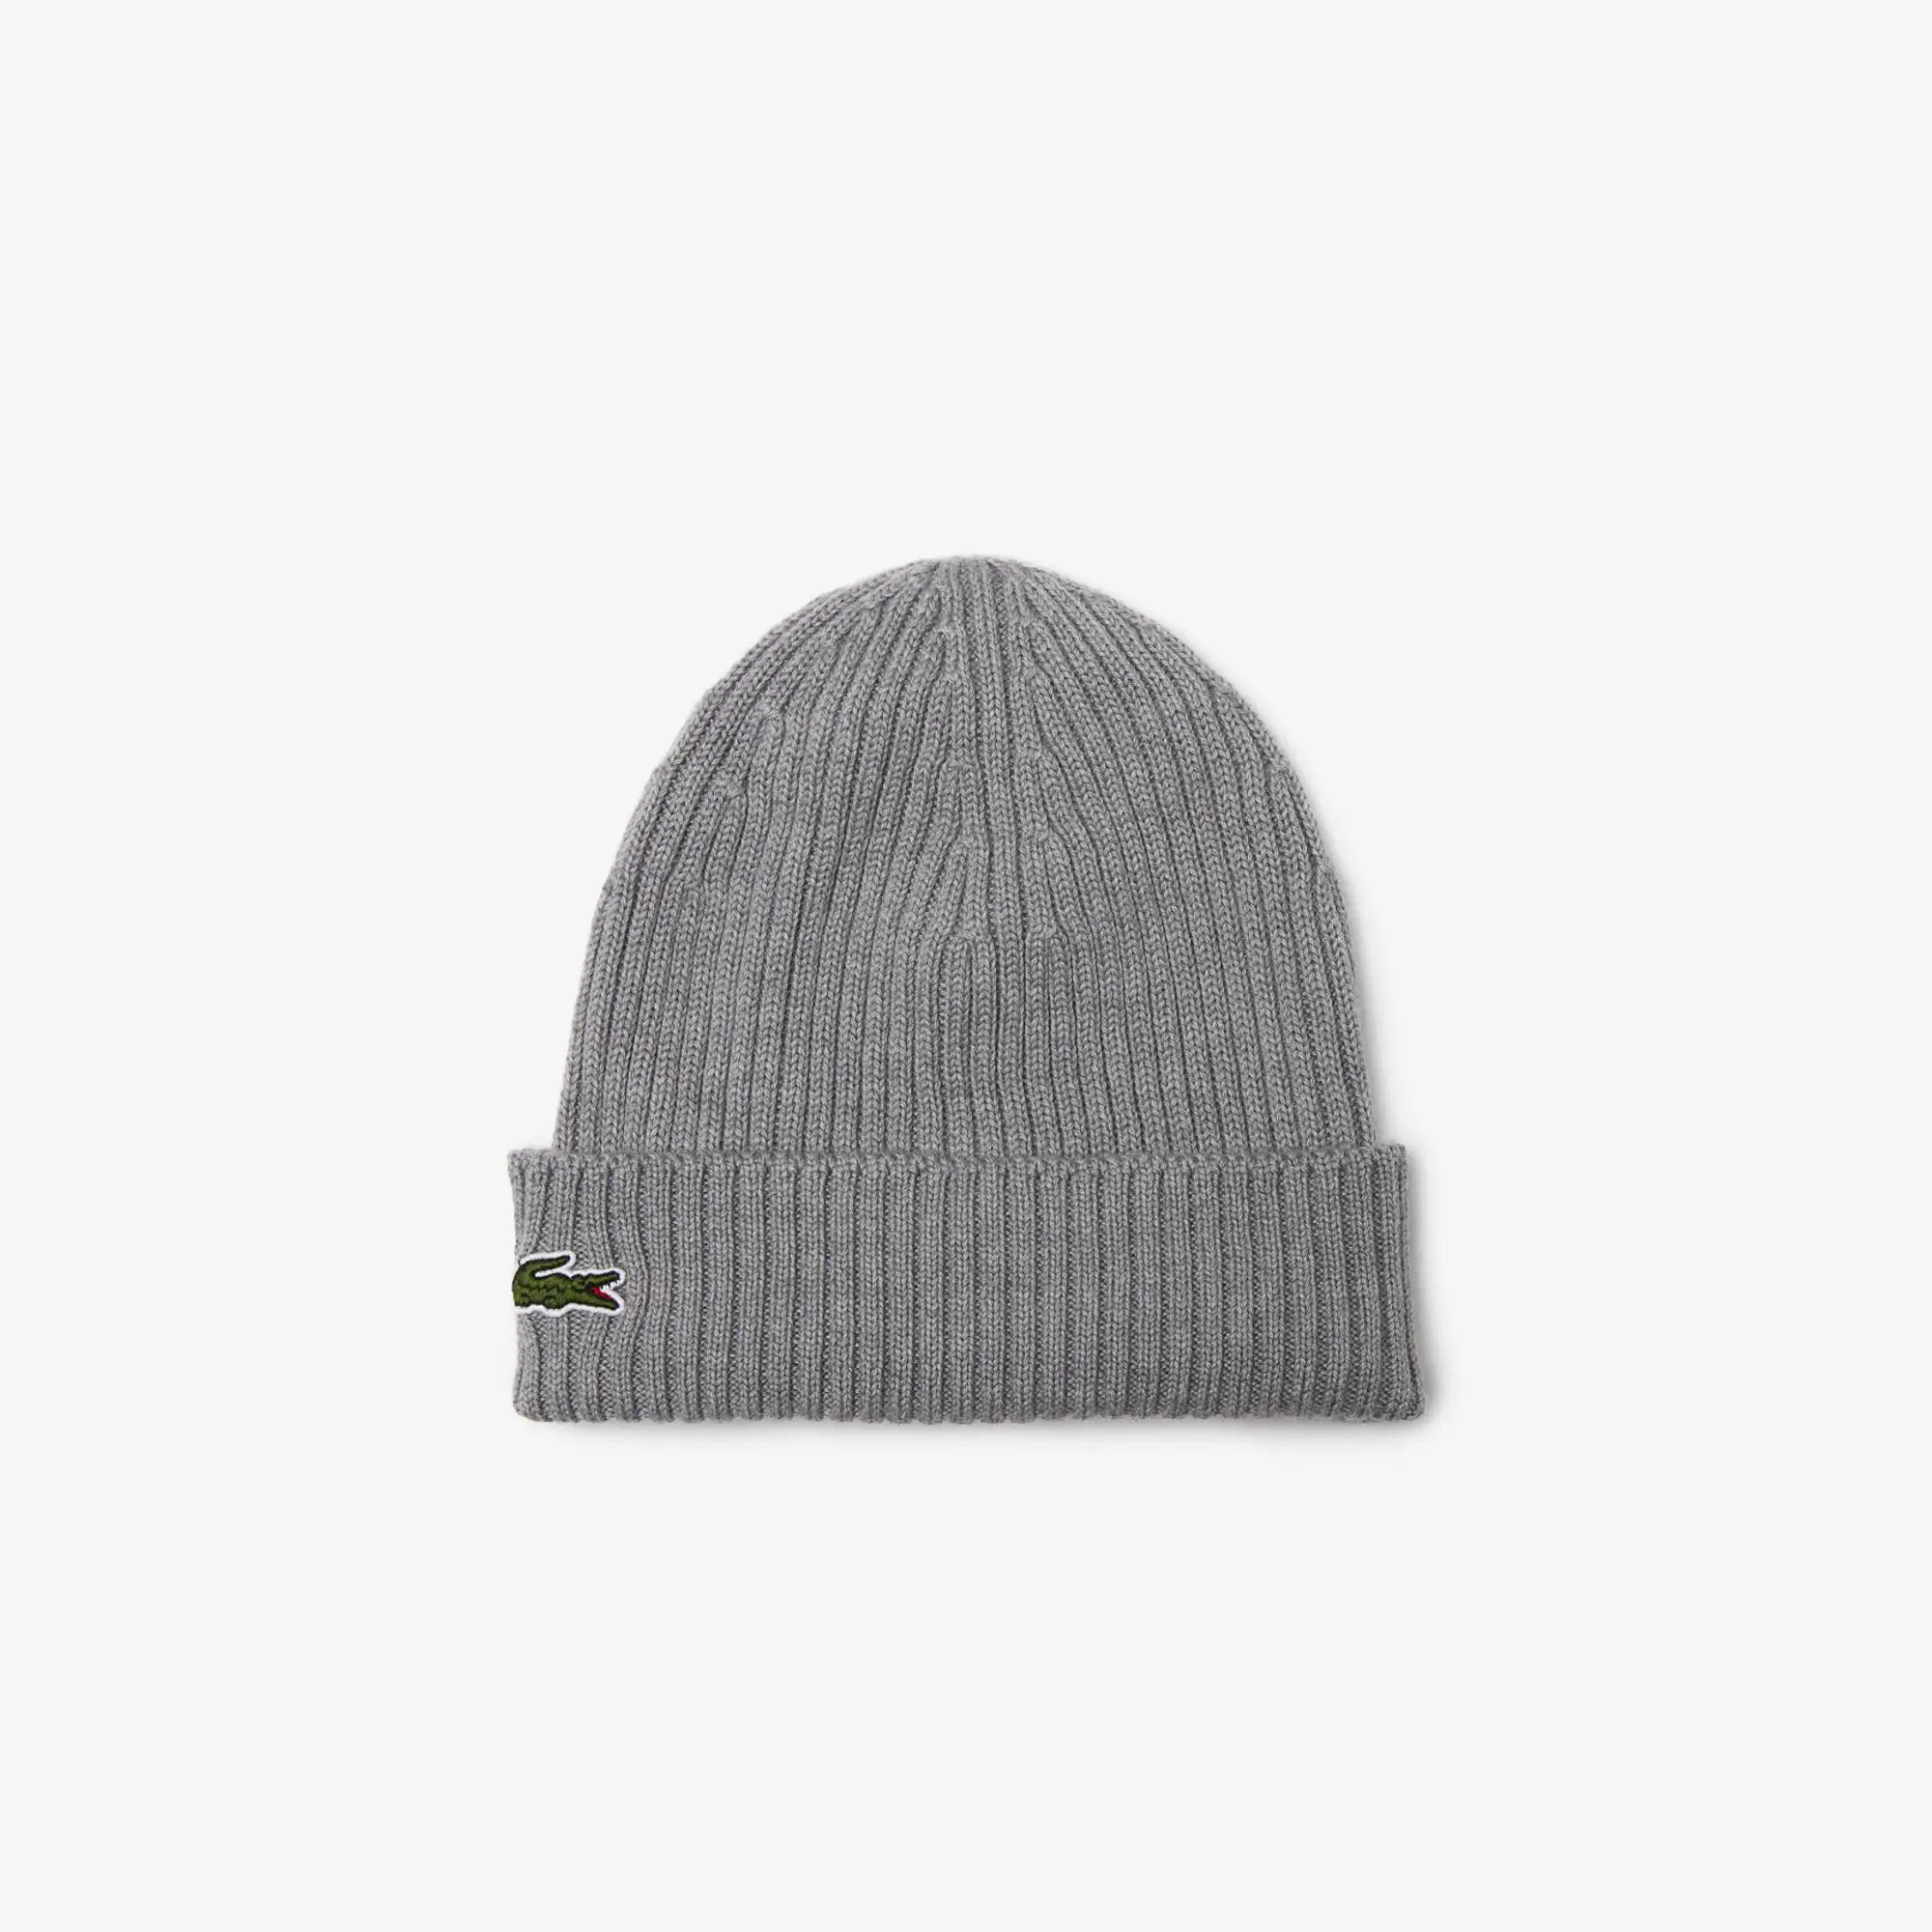 Lacoste Unisex Lacoste Ribbed Wool Beanie. 2